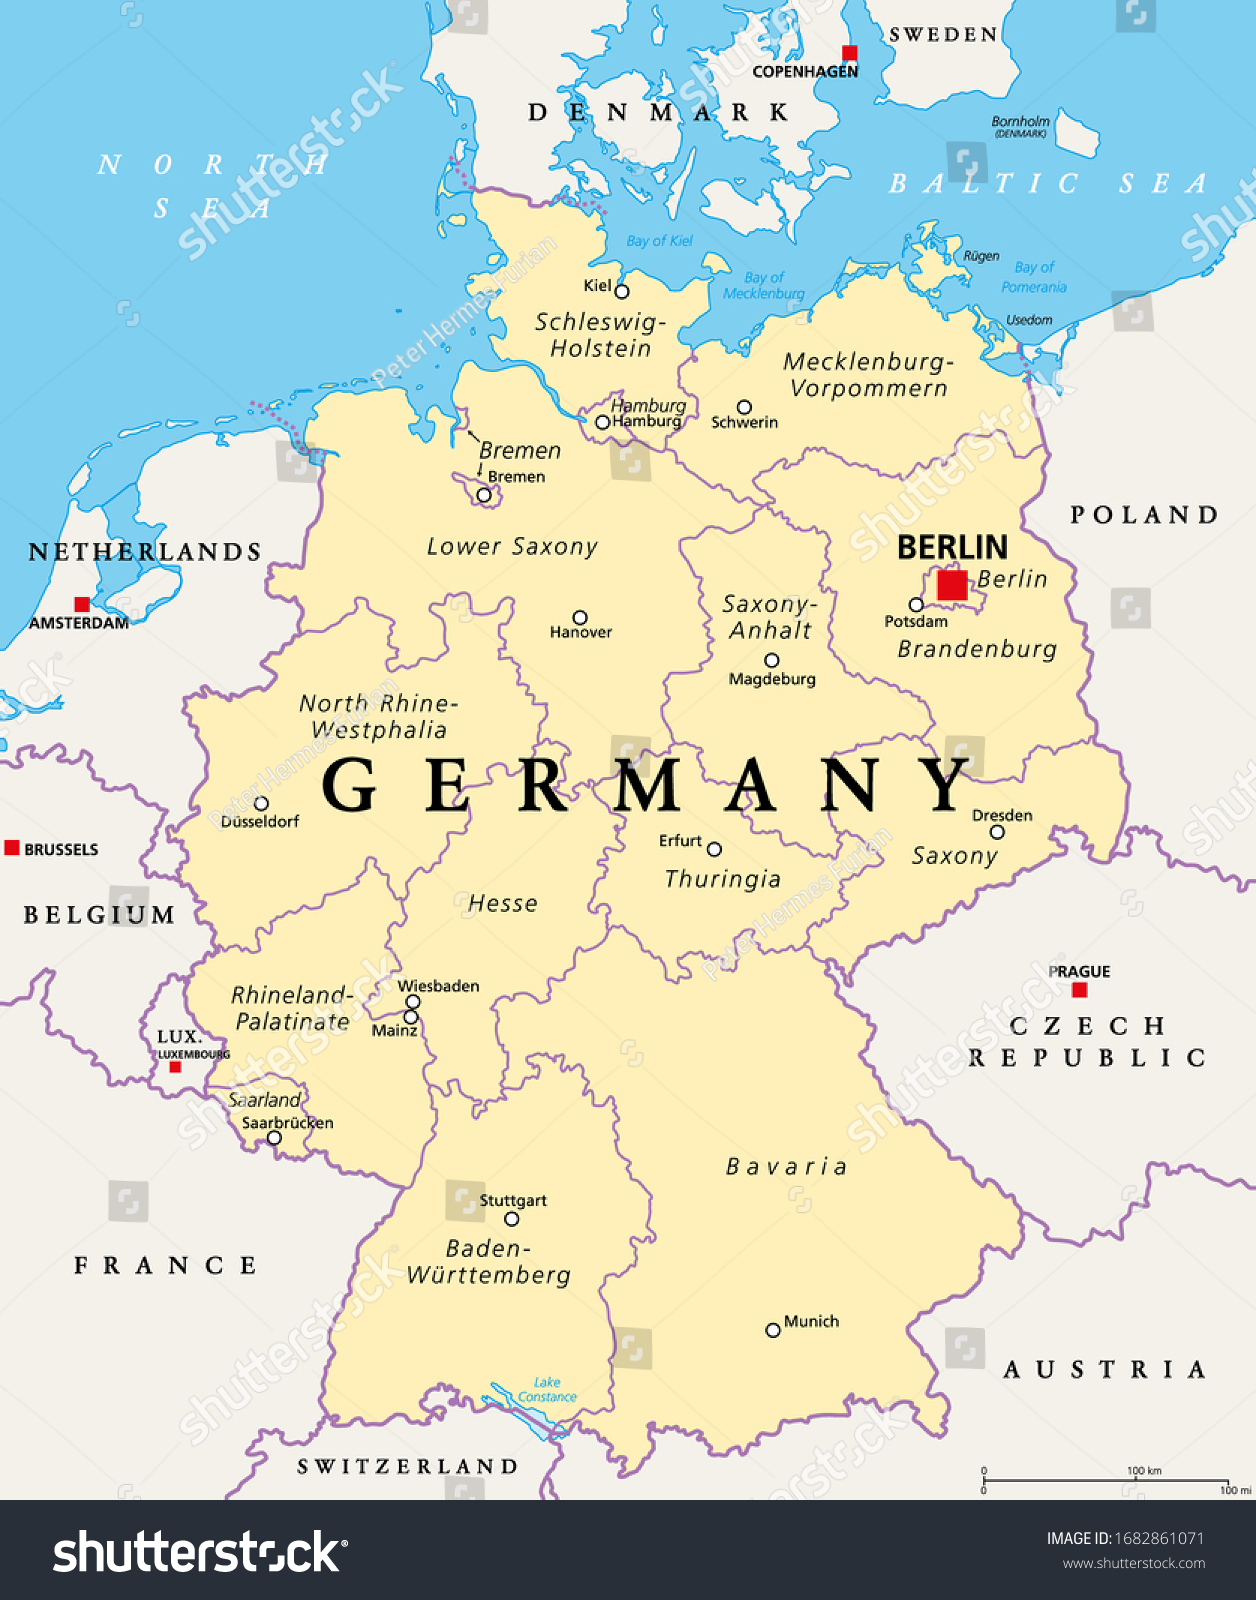 SVG of Germany, political map. States of the Federal Republic of Germany with capital Berlin and 16 partly-sovereign states. Country in Central and Western Europe. English labeling. Illustration. Vector. svg